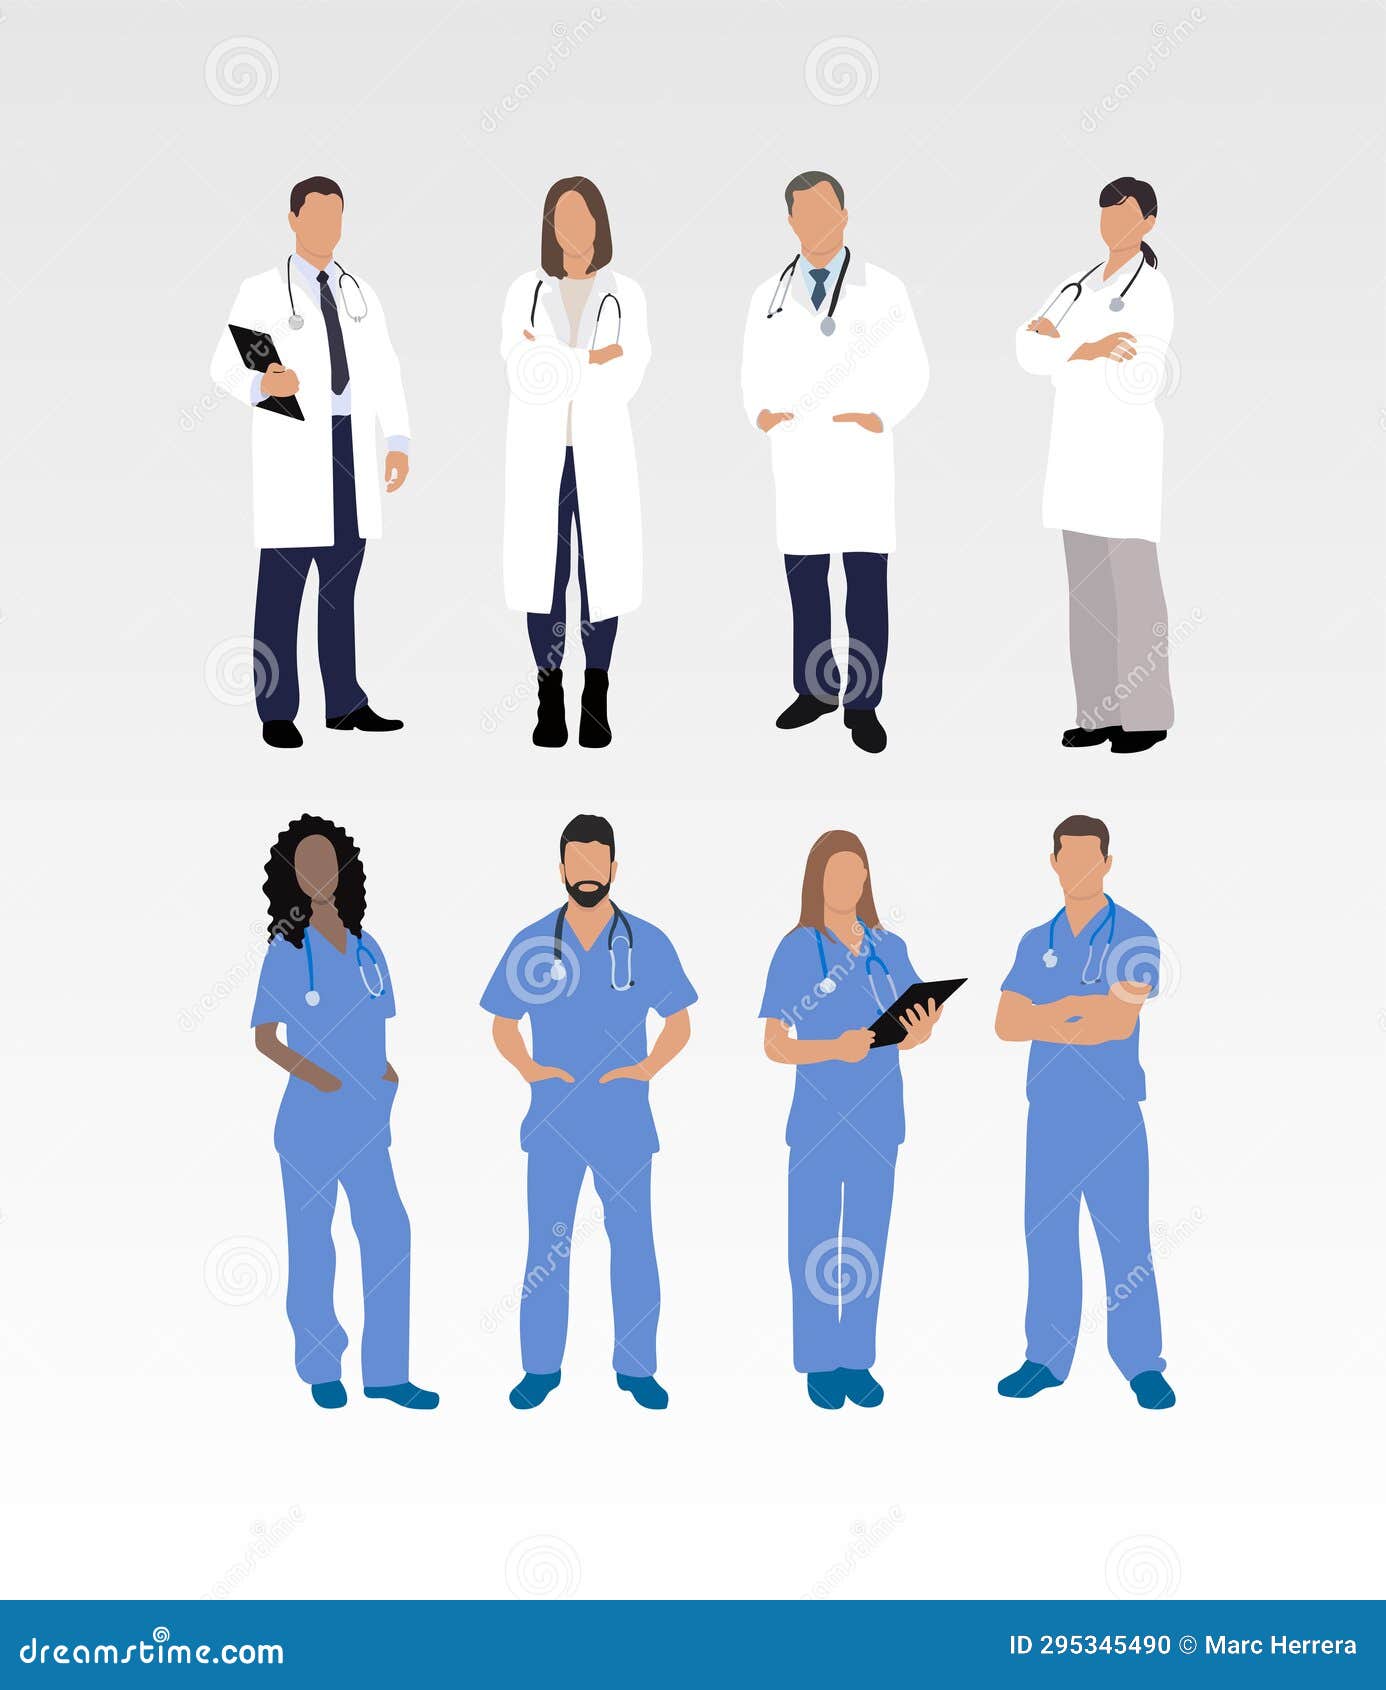 variety of medicine and healthcare staff